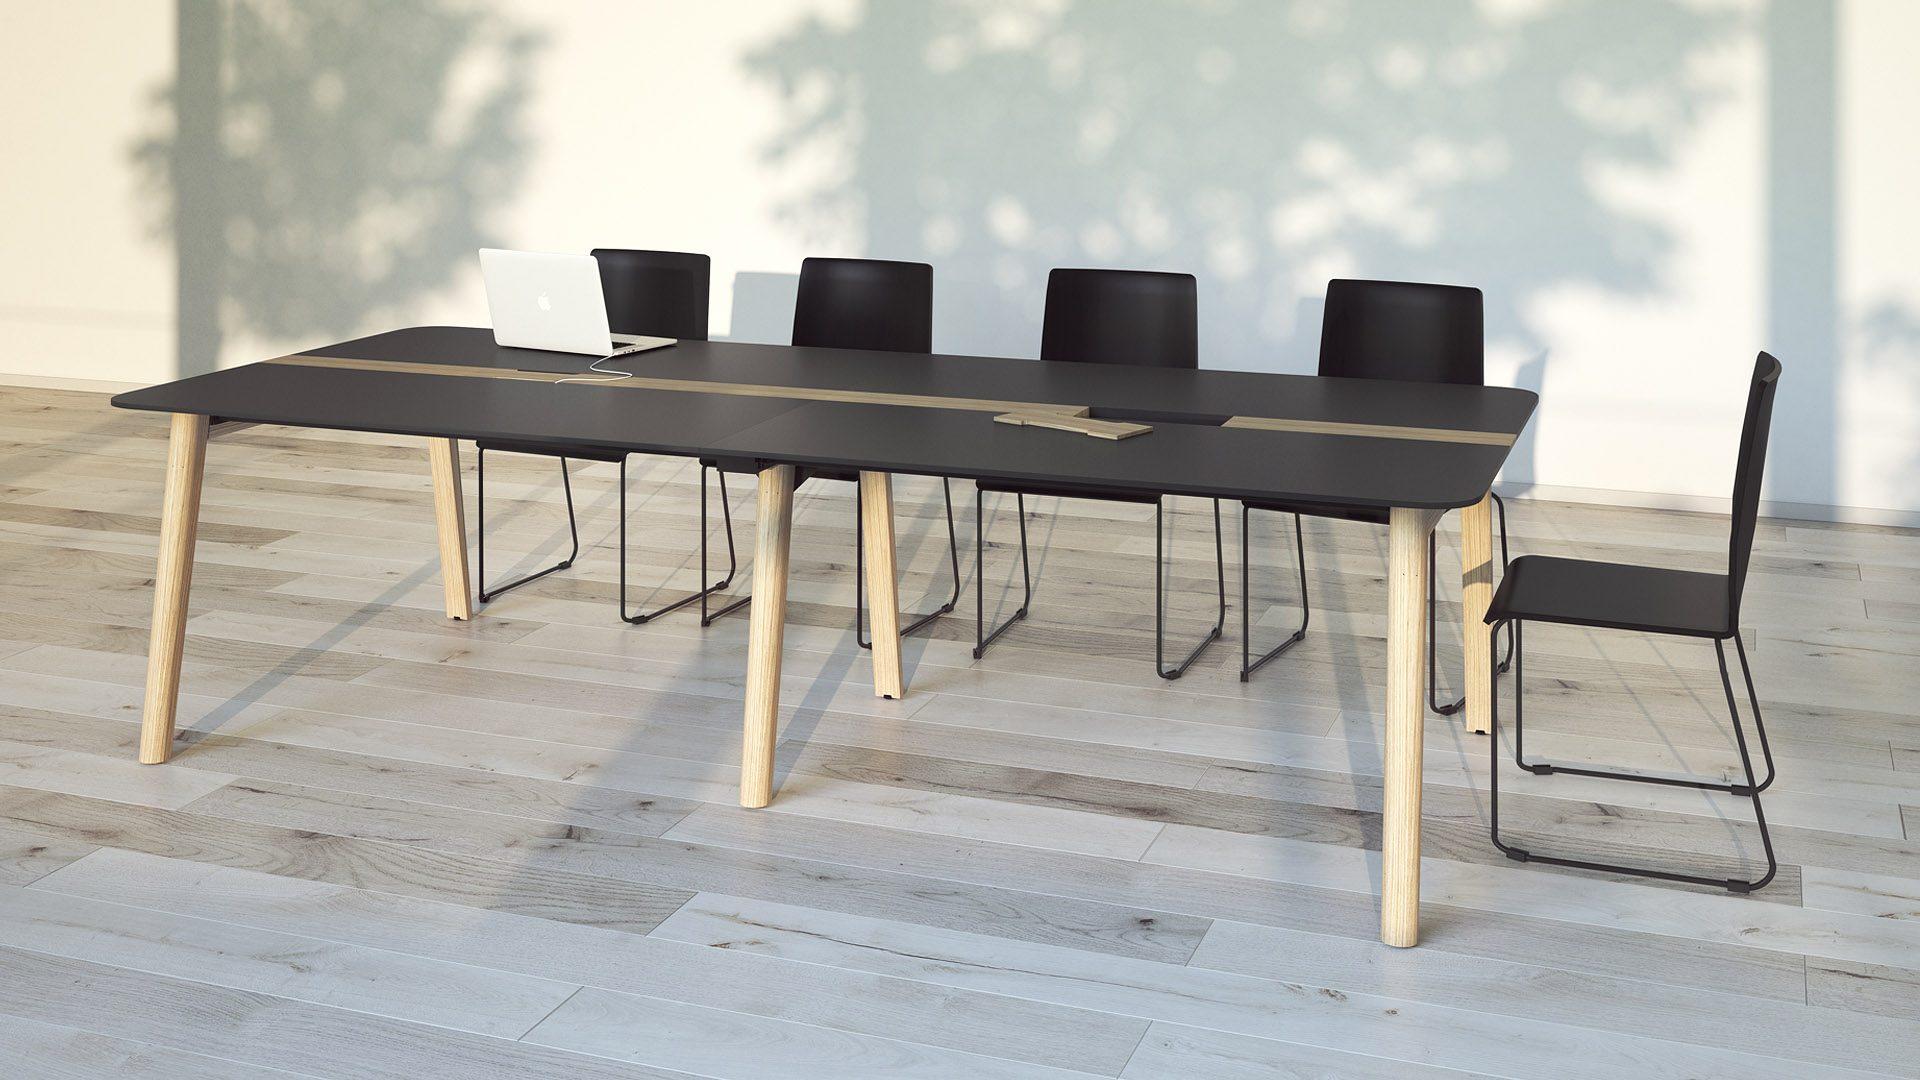 Nova Wood meeting tables include cable management concealed in a central strip insert